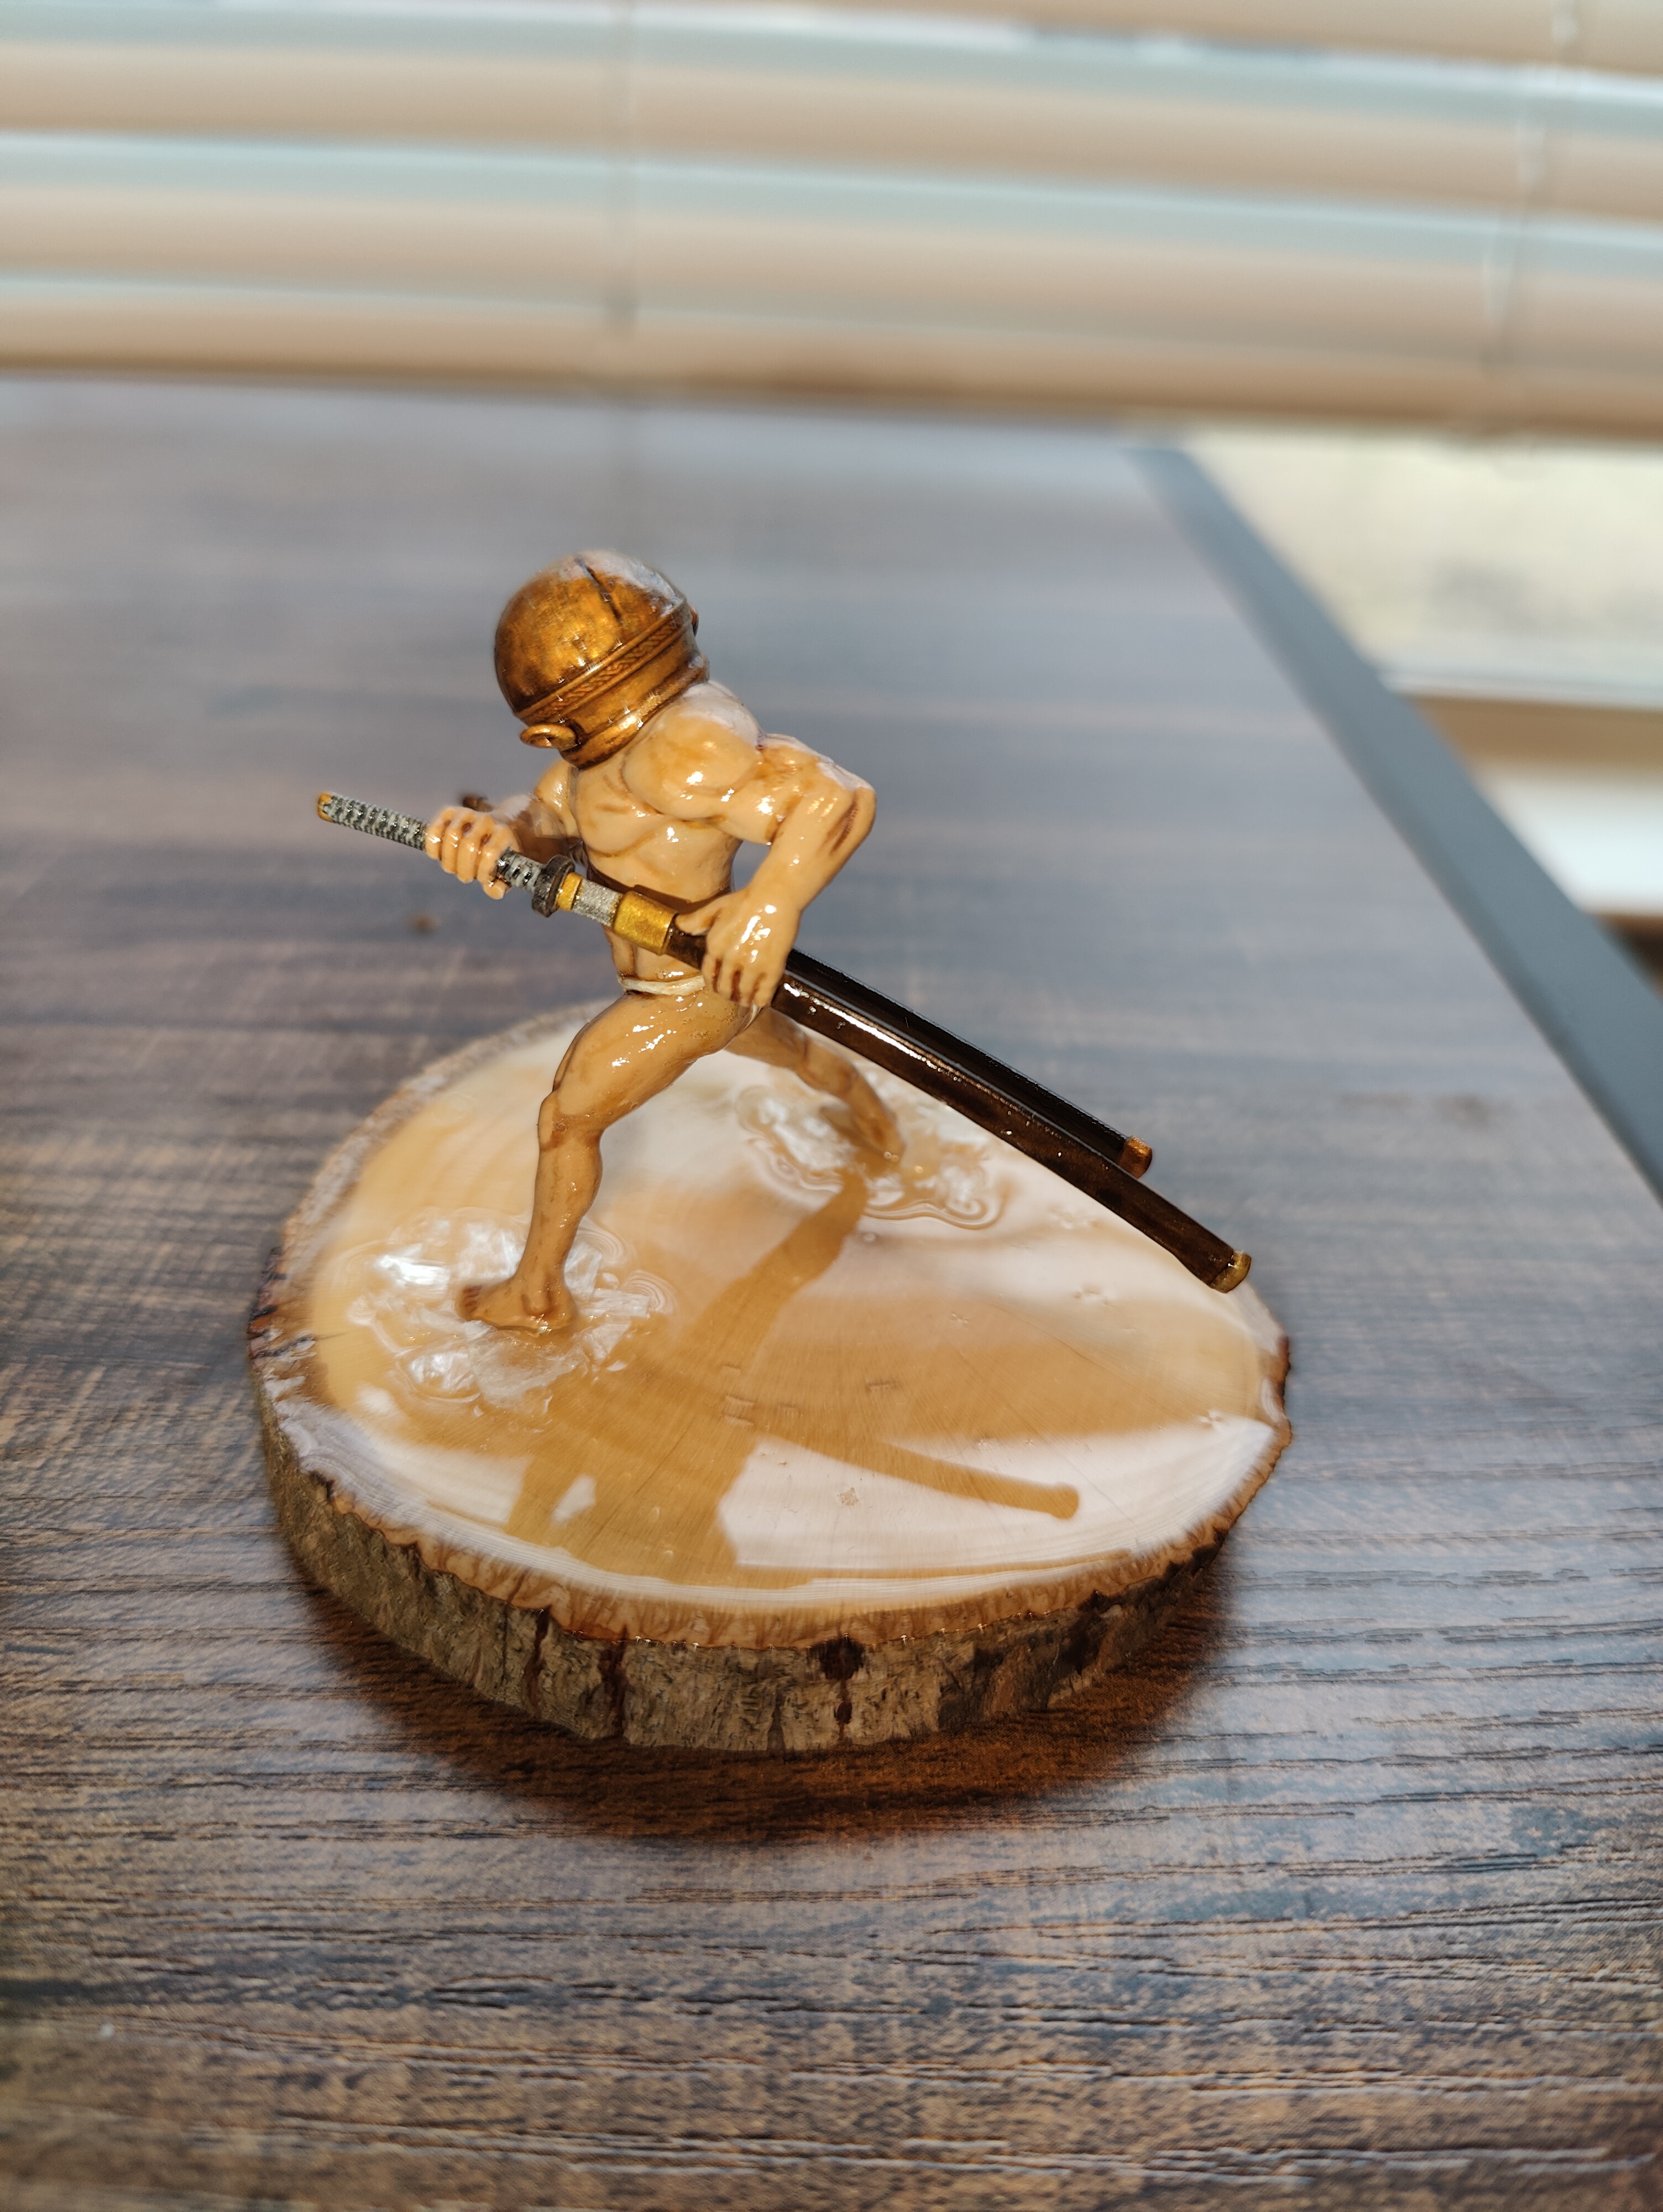 Elden Ring 3D Print - 'Let Me Solo Her' Miniature (Hand Painted) 